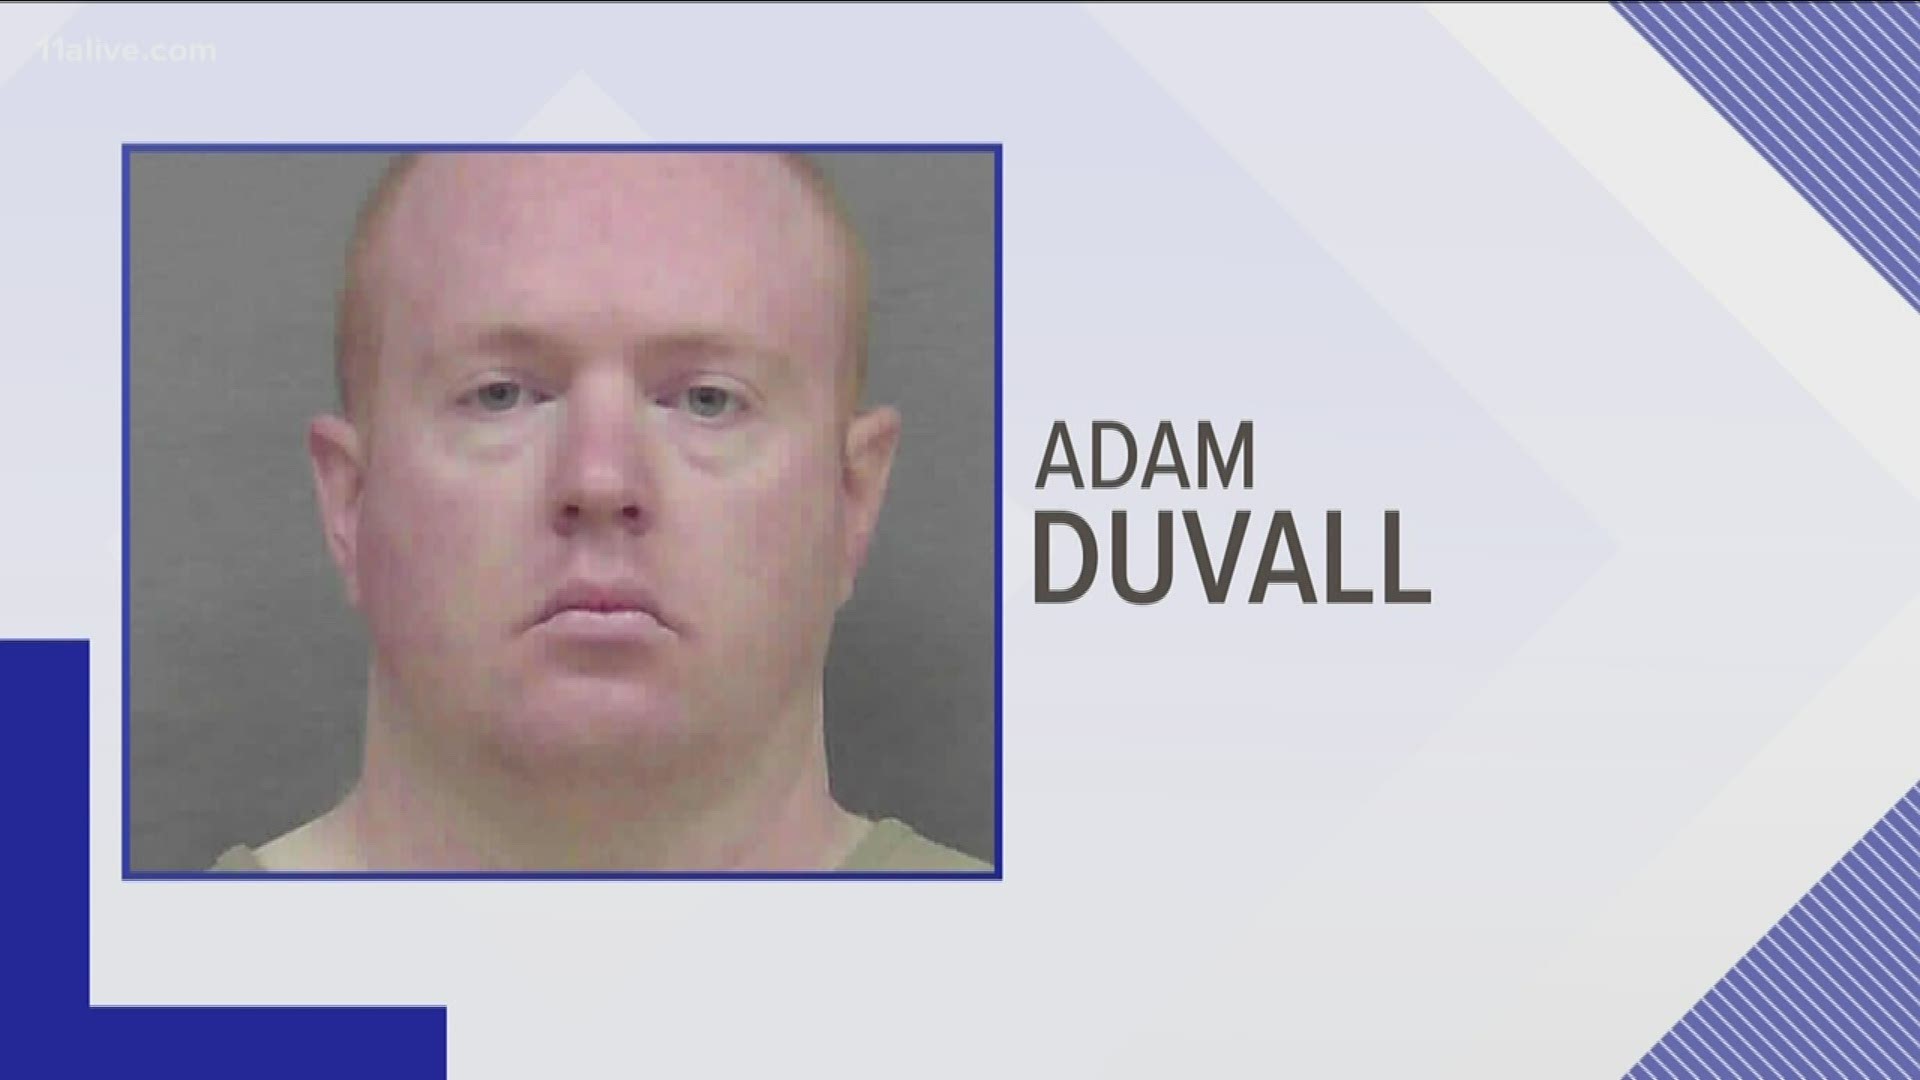 The GBI confirmed Gordon County Firefighter Adam Duvall was arrested on charges related to possession of child pornography.